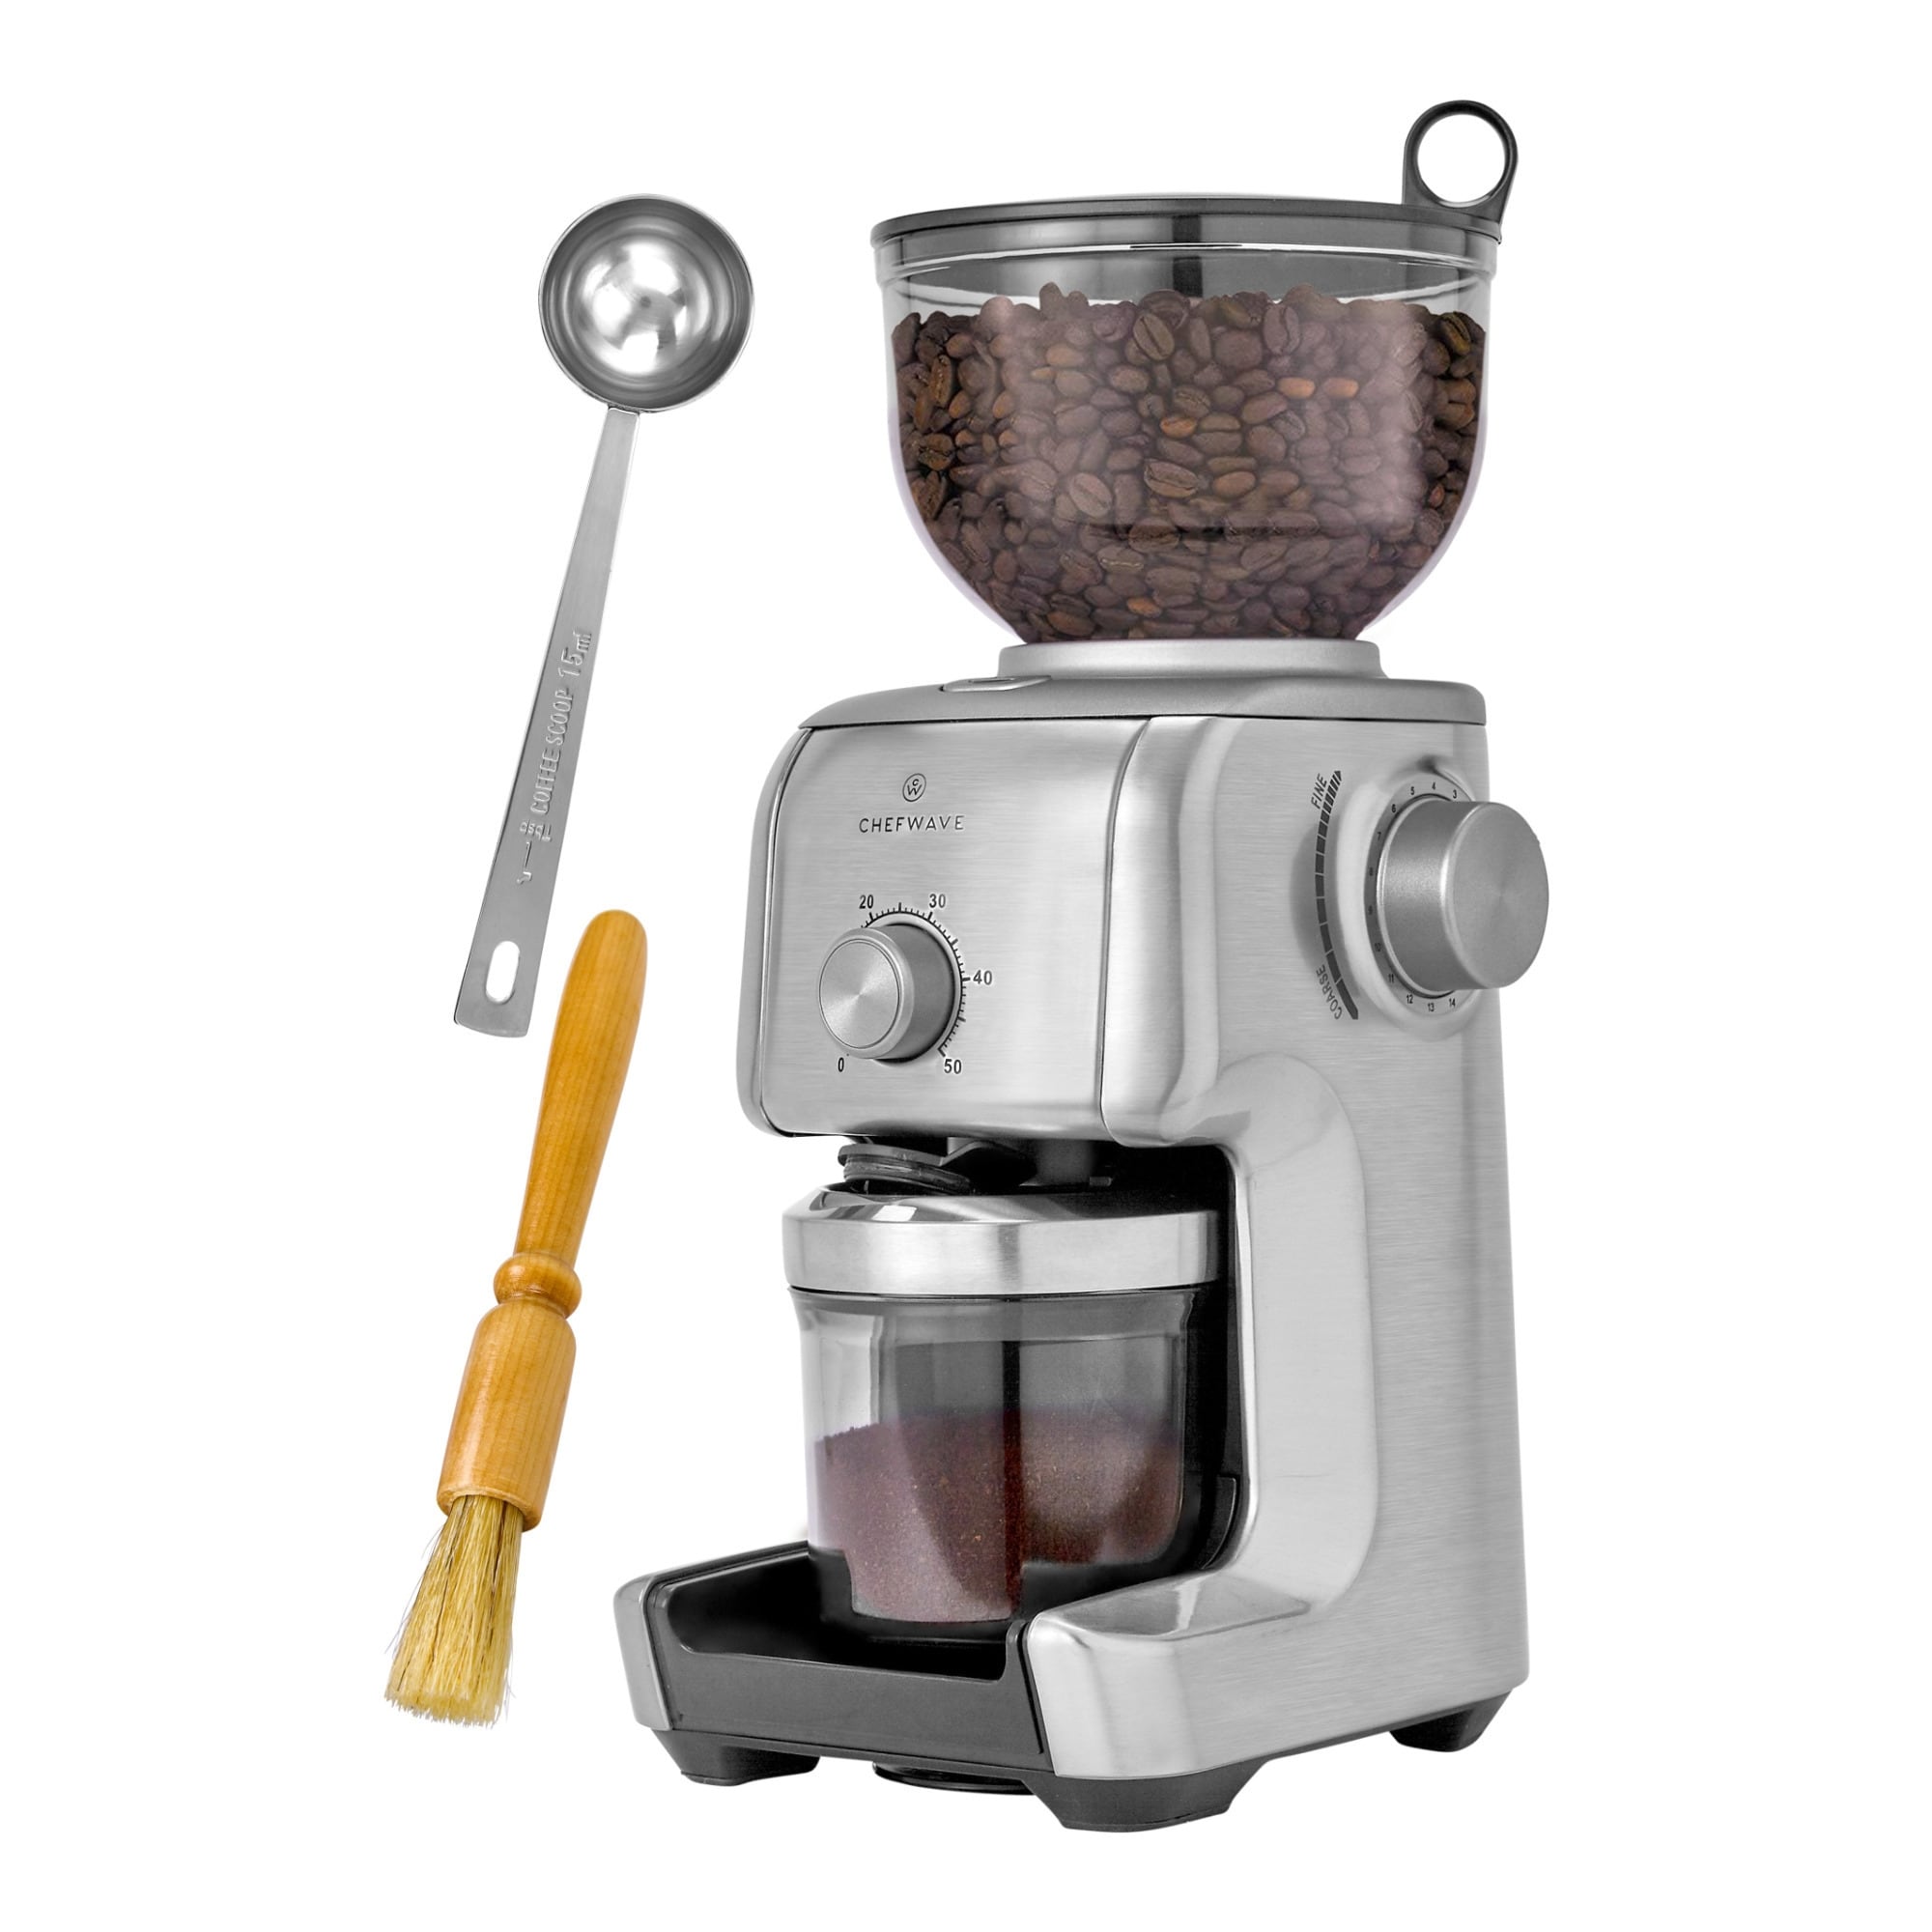 https://ak1.ostkcdn.com/images/products/is/images/direct/e3ade565b41abf47b1b051a36934719aca92a2bd/ChefWave-Bonne-Conical-Burr-Coffee-Grinder-%28Stainless-Steel%29.jpg